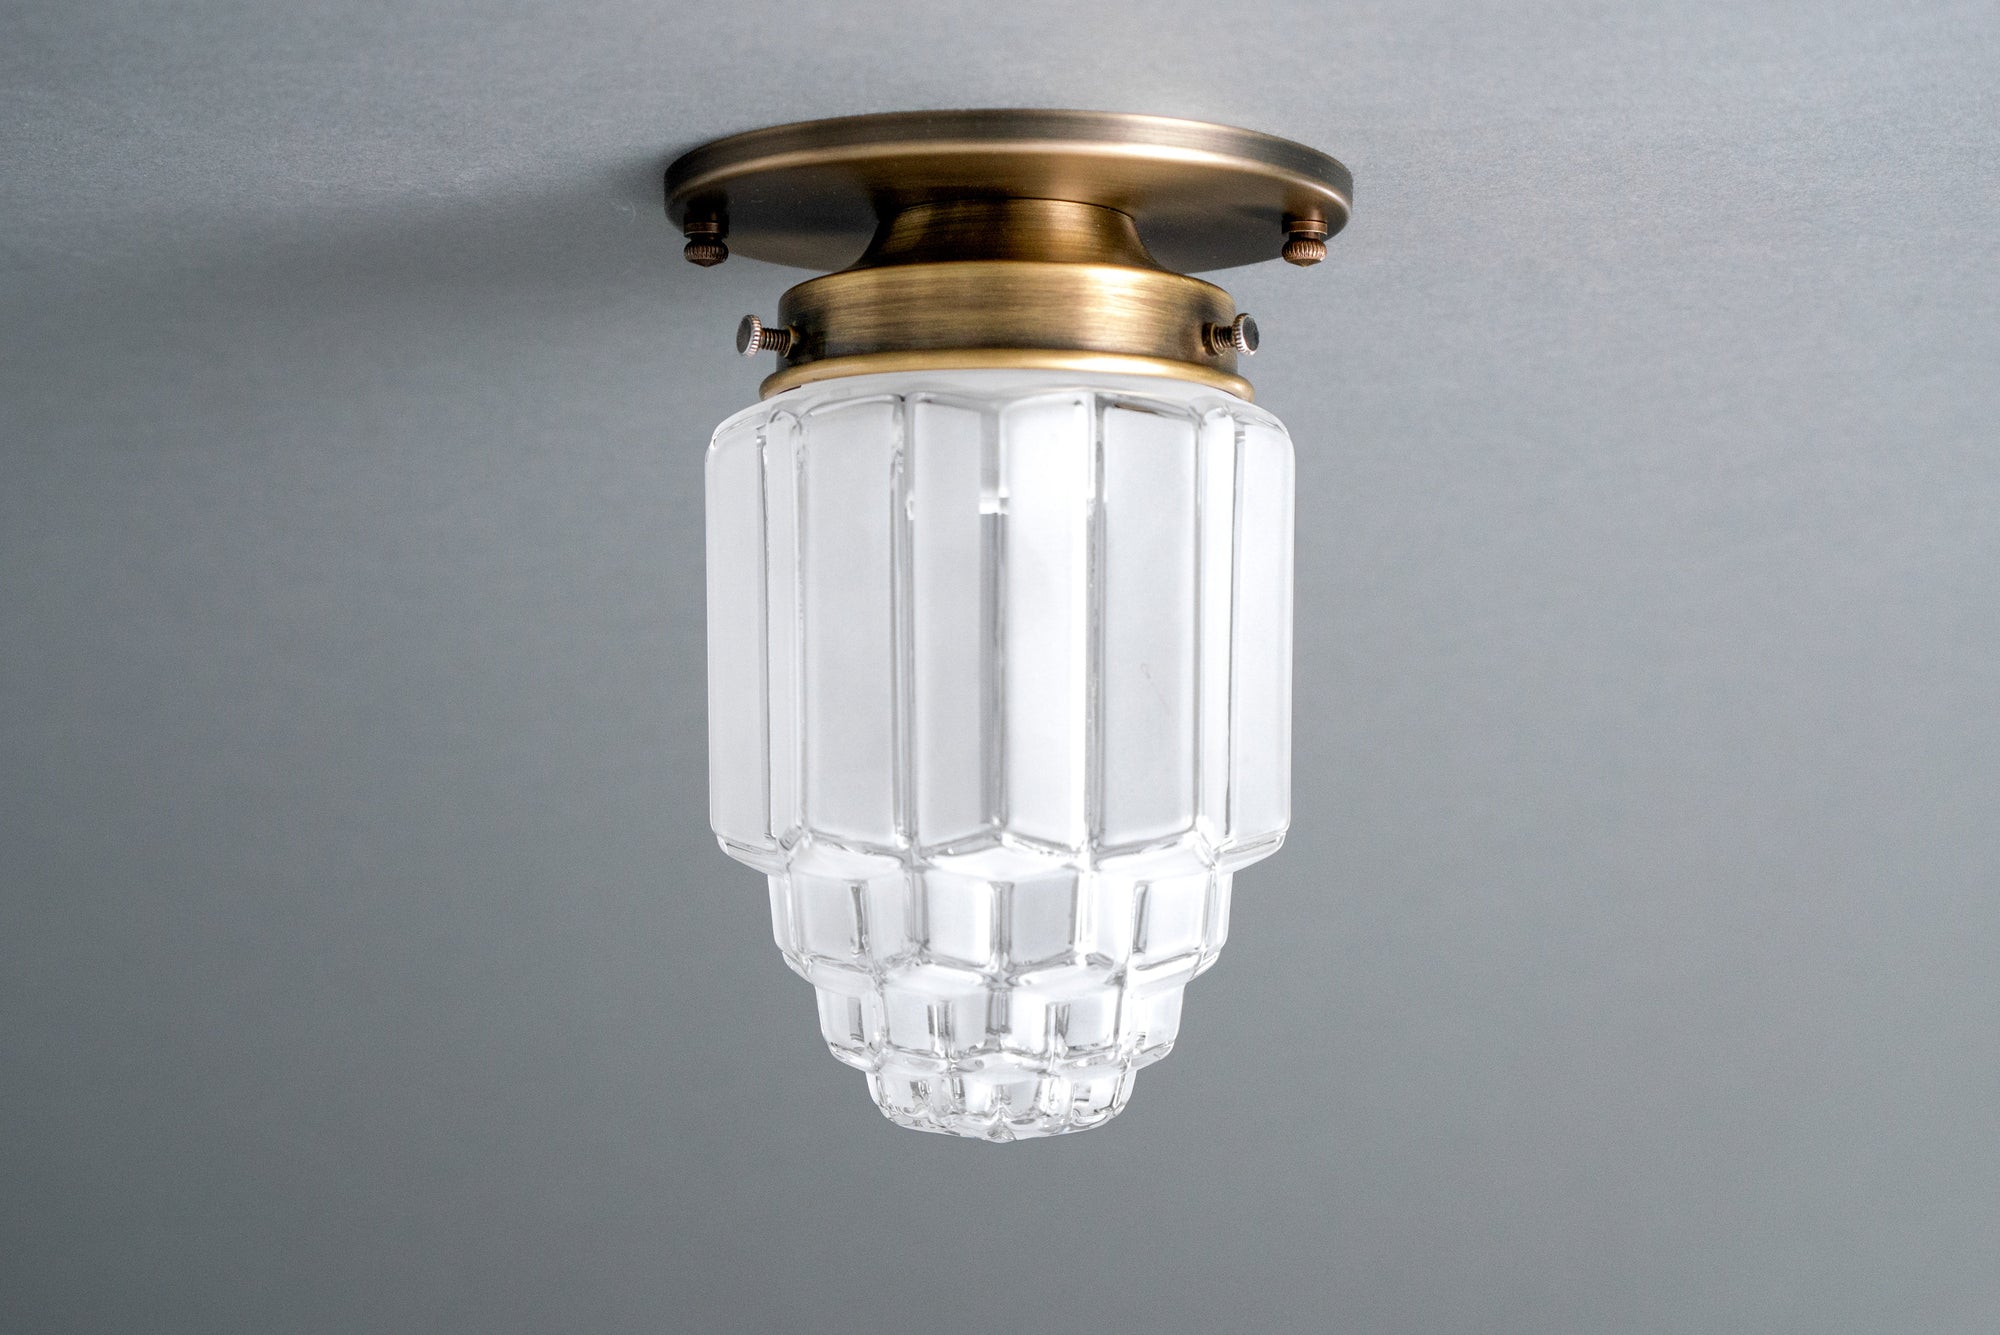 Ceiling Light Model No 8895 Peared